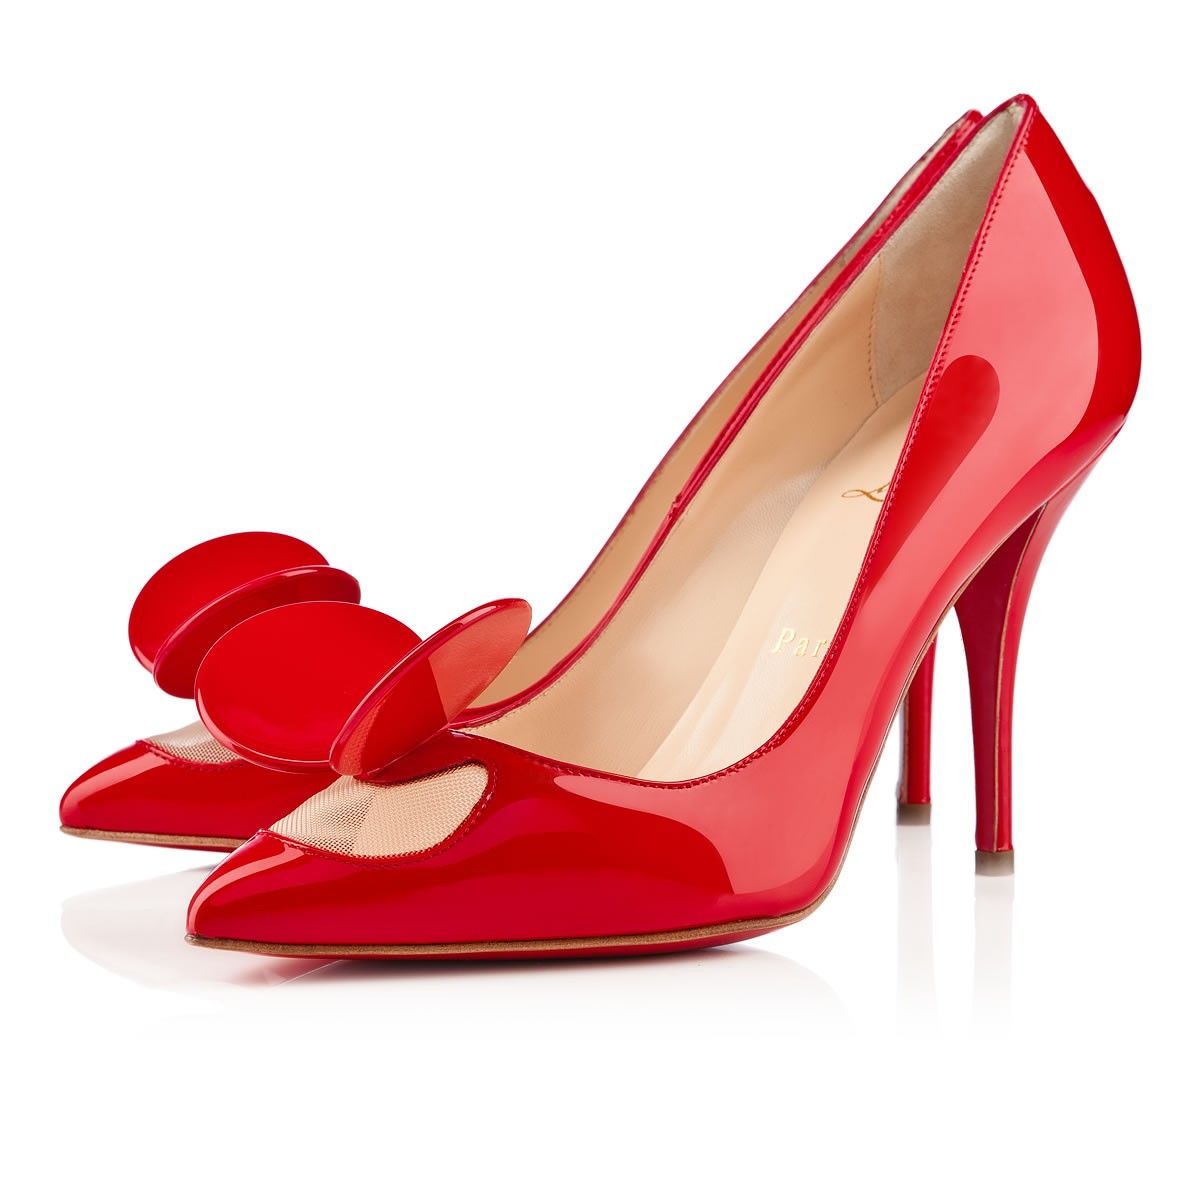 Christian Louboutin Madame mouse 100mm Pumps Red